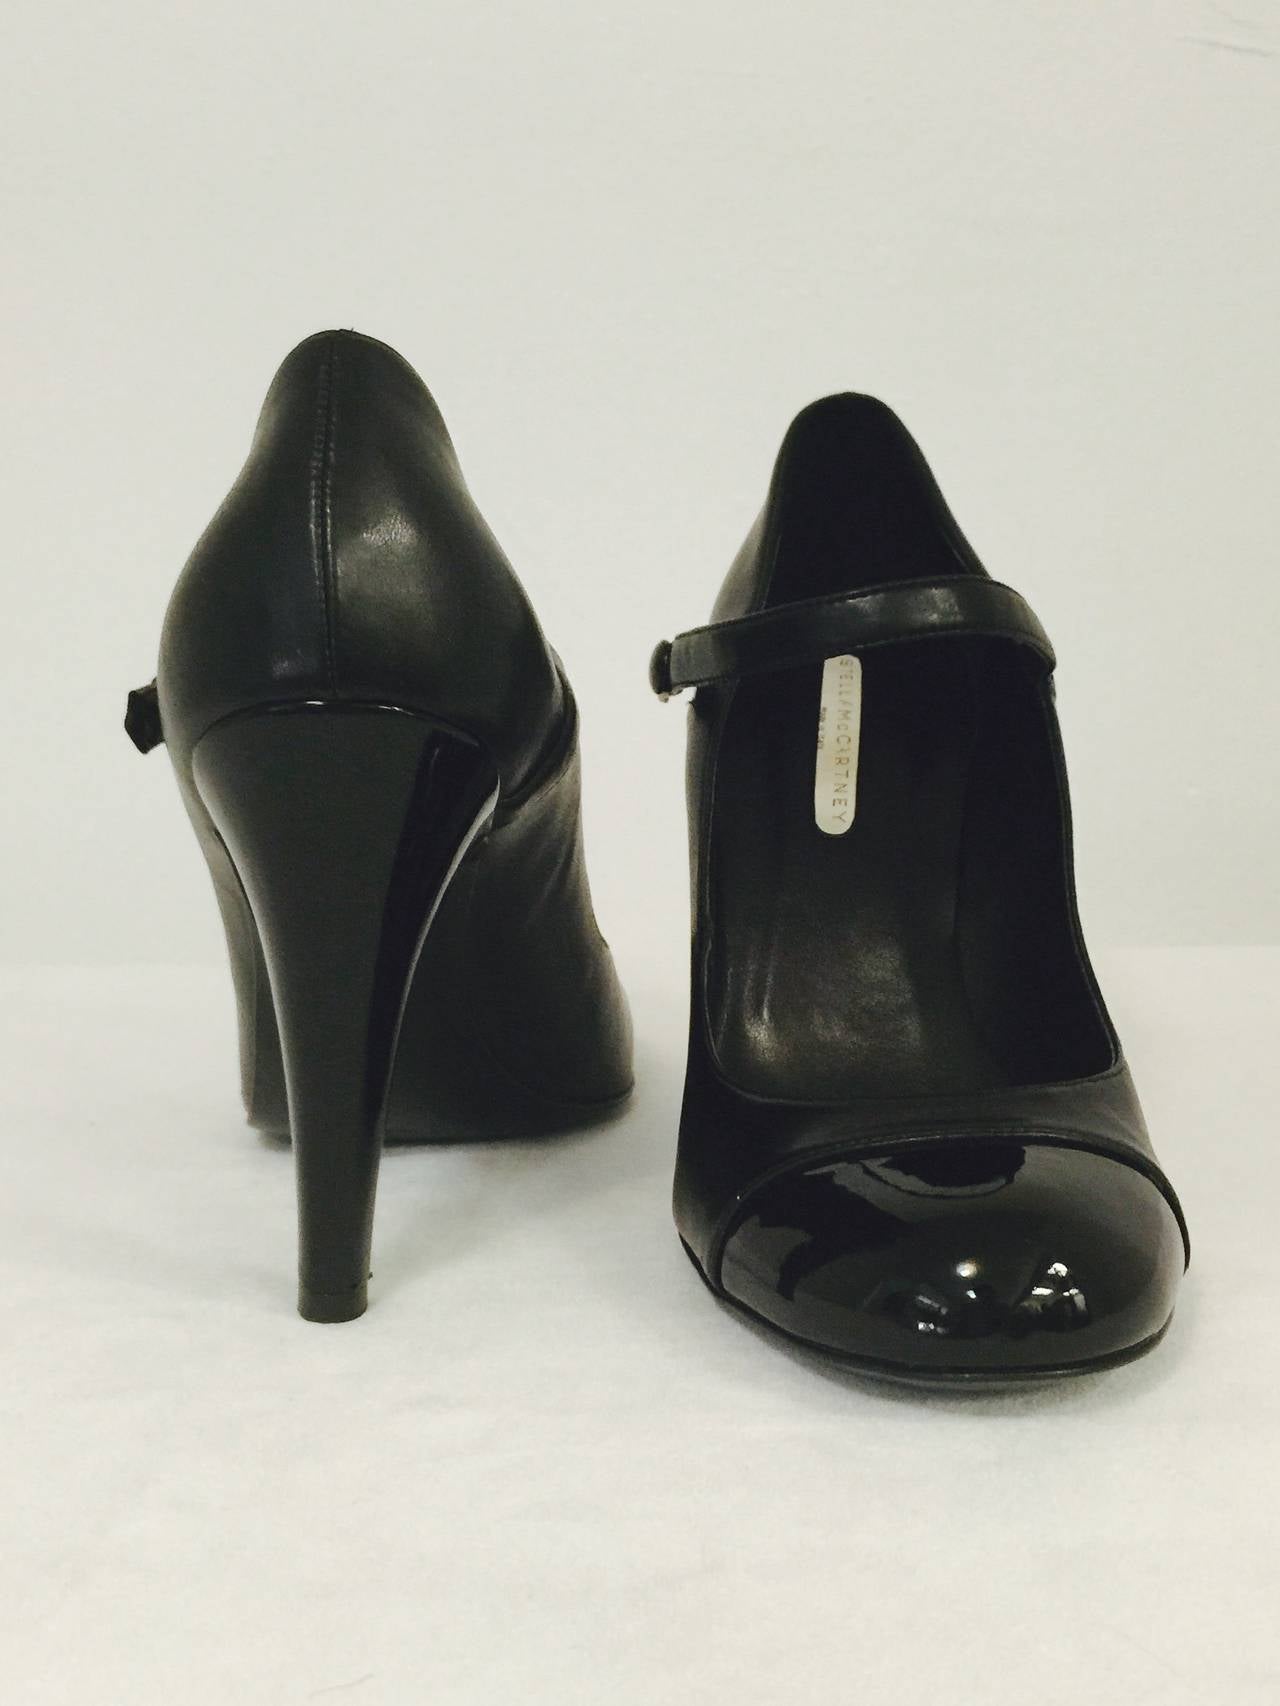 Stella McCartney High Heel Mary Jane Pumps In Excellent Condition For Sale In Palm Beach, FL